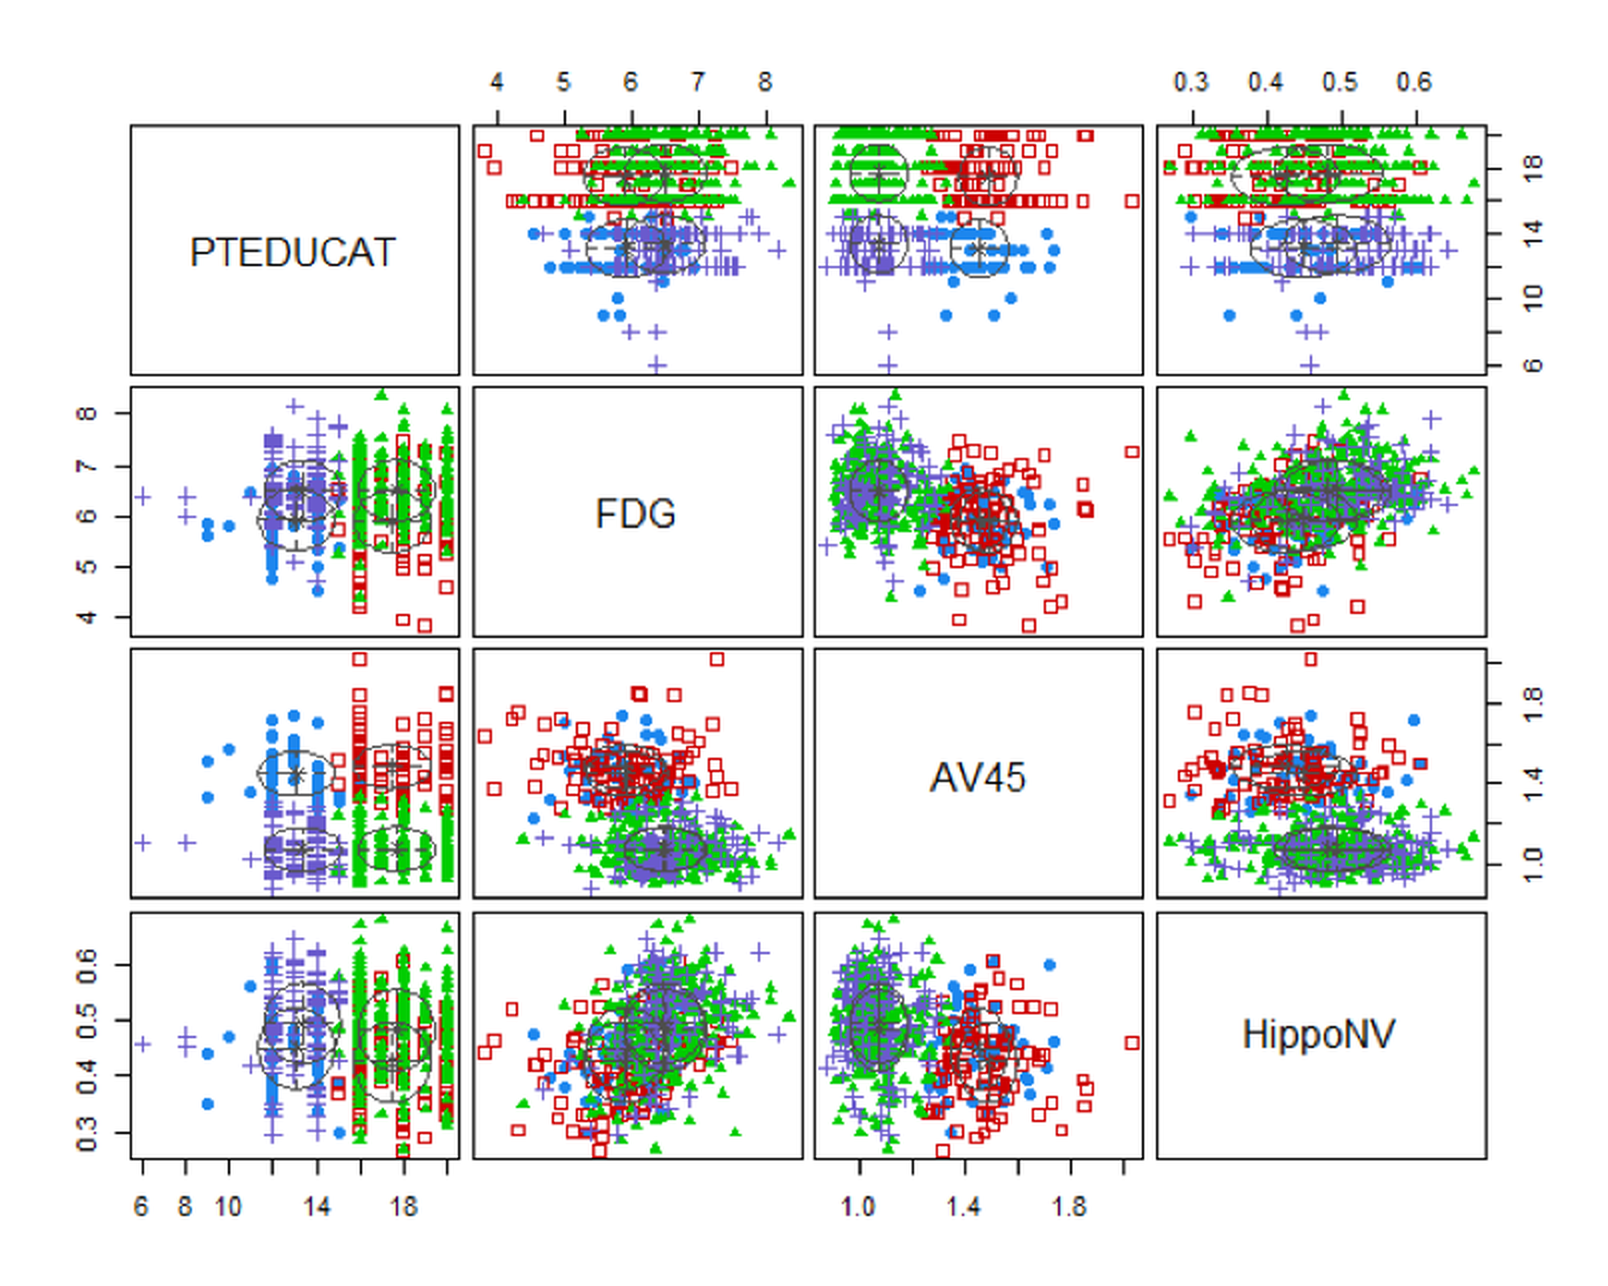 Clustering results of the AD dataset